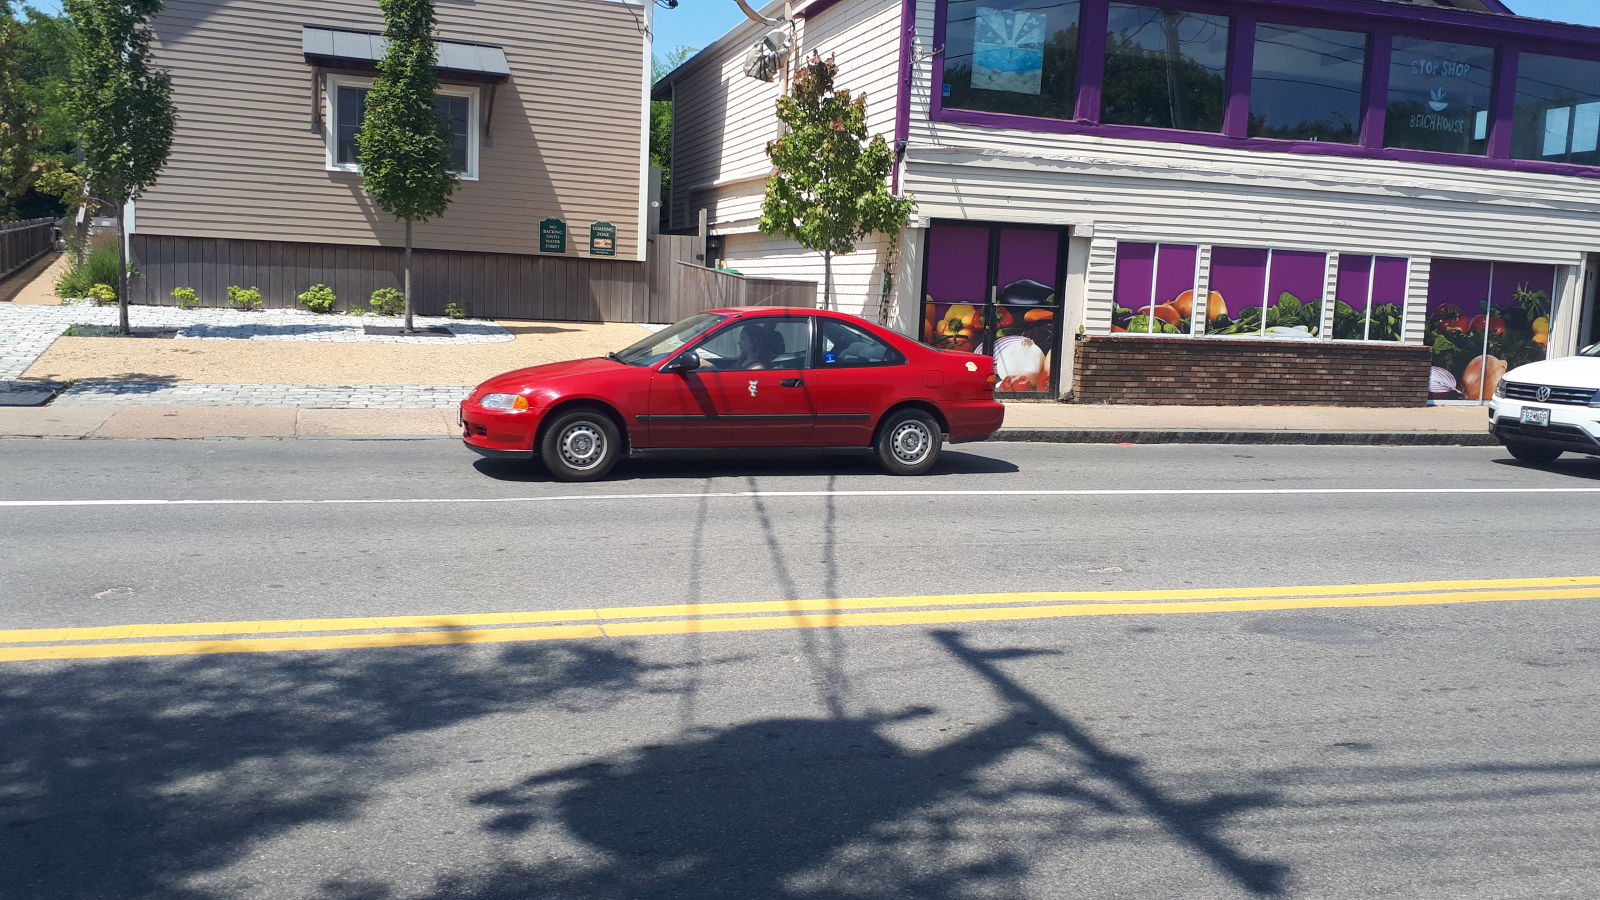 Illustration for article titled Unicorn sighting: a red 90s Honda THAT STILL HAS GLOSSY PAINT!